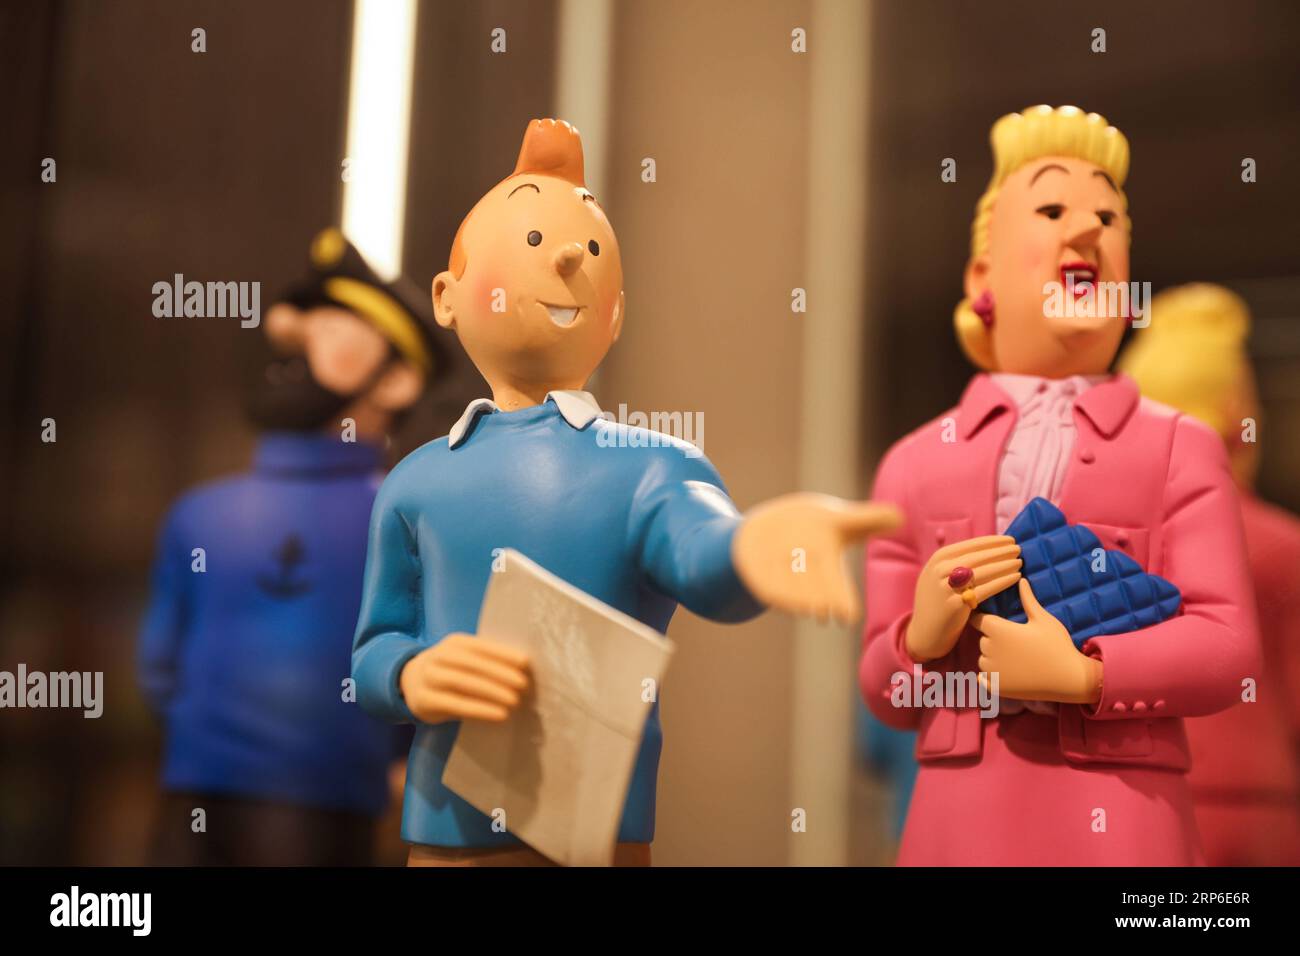 (190110) -- BRUSSELS, Jan. 10, 2019 -- Toy models of Tintin and other figures based on the comic series The Adventures of Tintin are seen at a gift shop in Brussels, Belgium, Jan. 10, 2019. Belgian comic works The Adventures of Tintin ?celebrated its 90th anniversary on Thursday. The series of 24?comic albums?were created by?Belgian?cartoonist Georges Remi, who wrote under the pen name?Herge. ) BELGIUM-BRUSSELS-COMIC-TINTIN-90TH ANNIVERSARY ZhengxHuansong PUBLICATIONxNOTxINxCHN Stock Photo